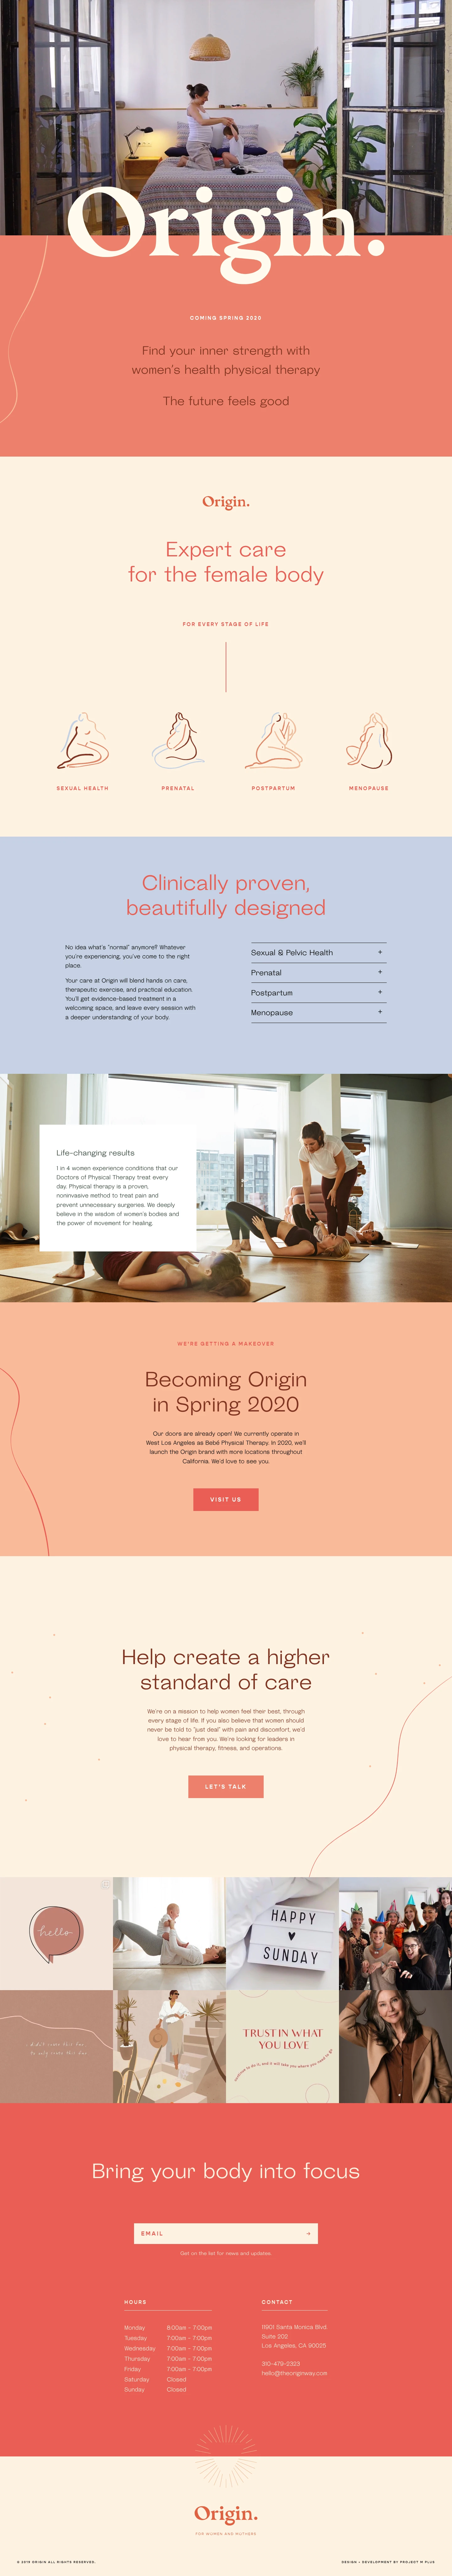 Origin Landing Page Example: Women's health and pelvic floor physical therapy. For women and mothers.